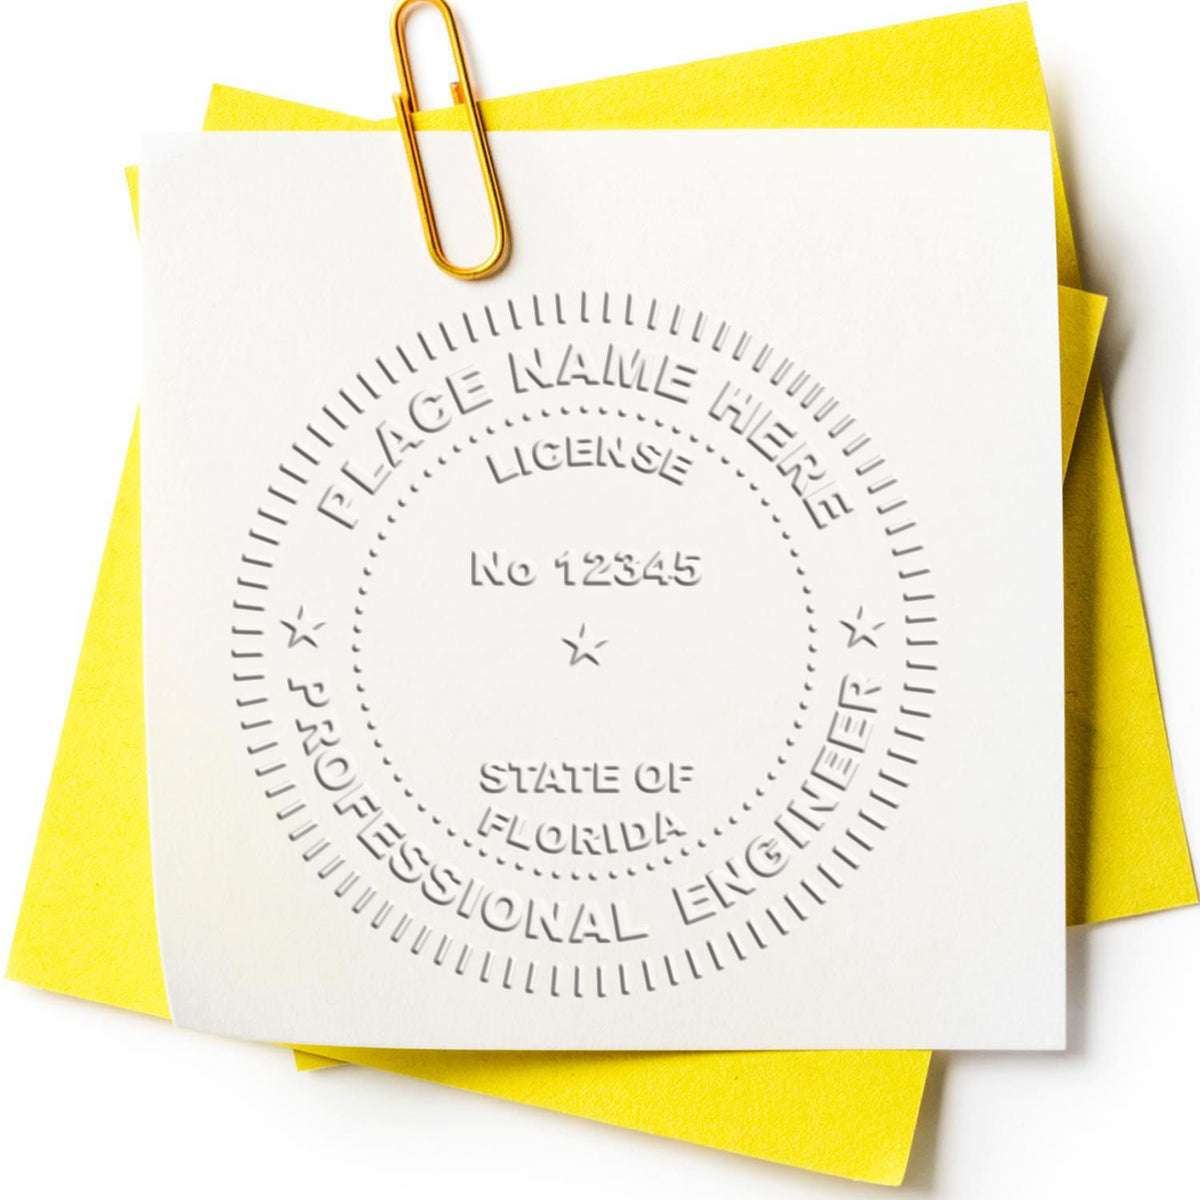 A photograph of the Hybrid Florida Engineer Seal stamp impression reveals a vivid, professional image of the on paper.